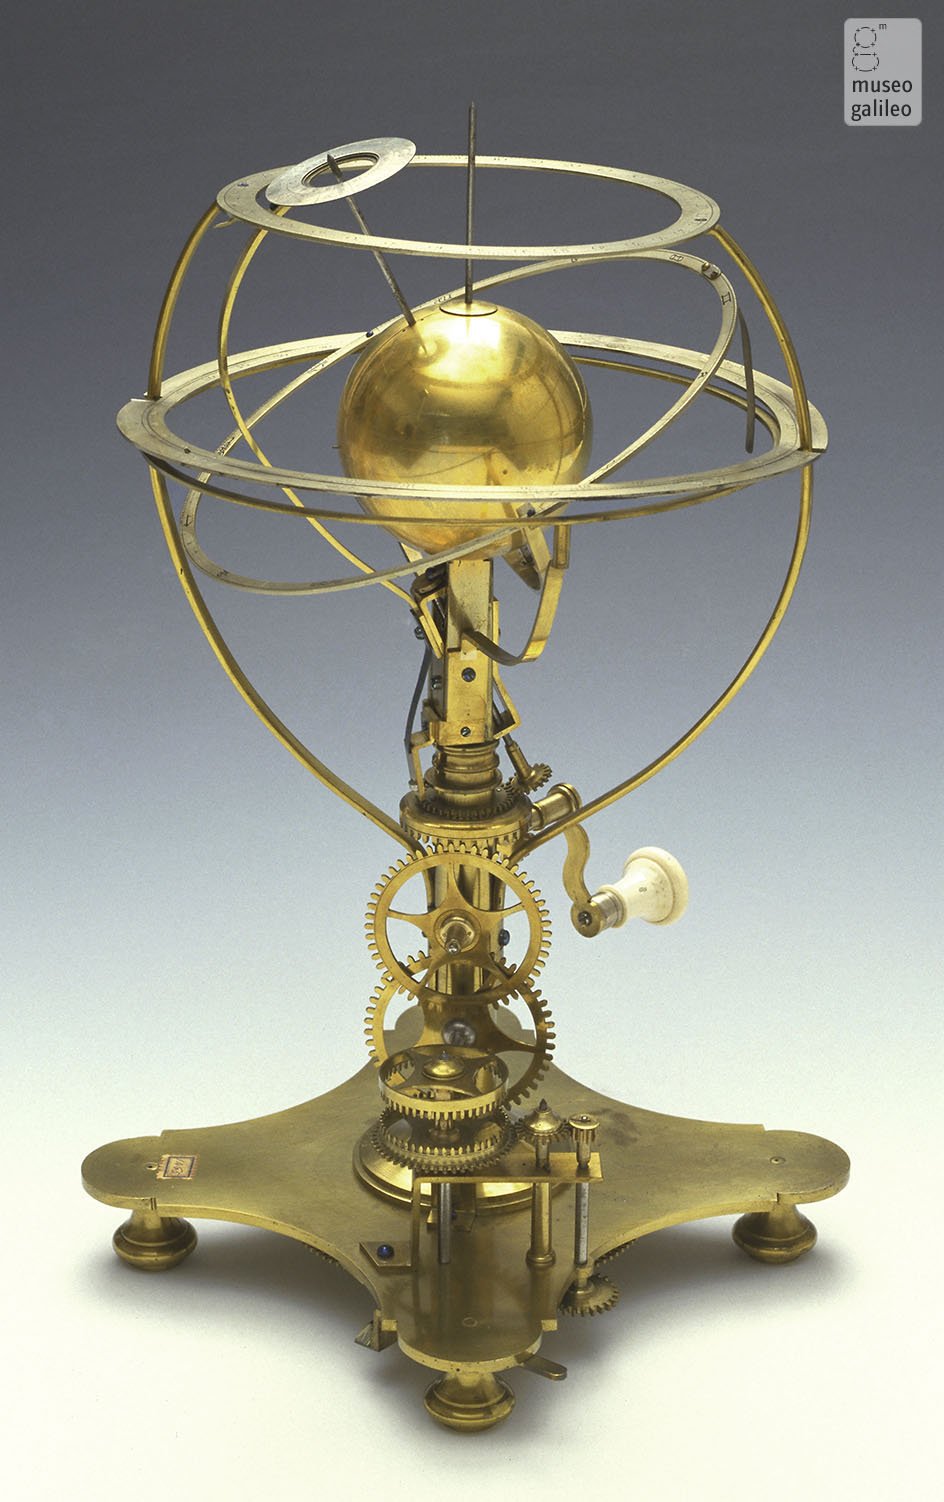 Model for the demonstration of precession of the equinoxes and nutation (Inv. 1465)